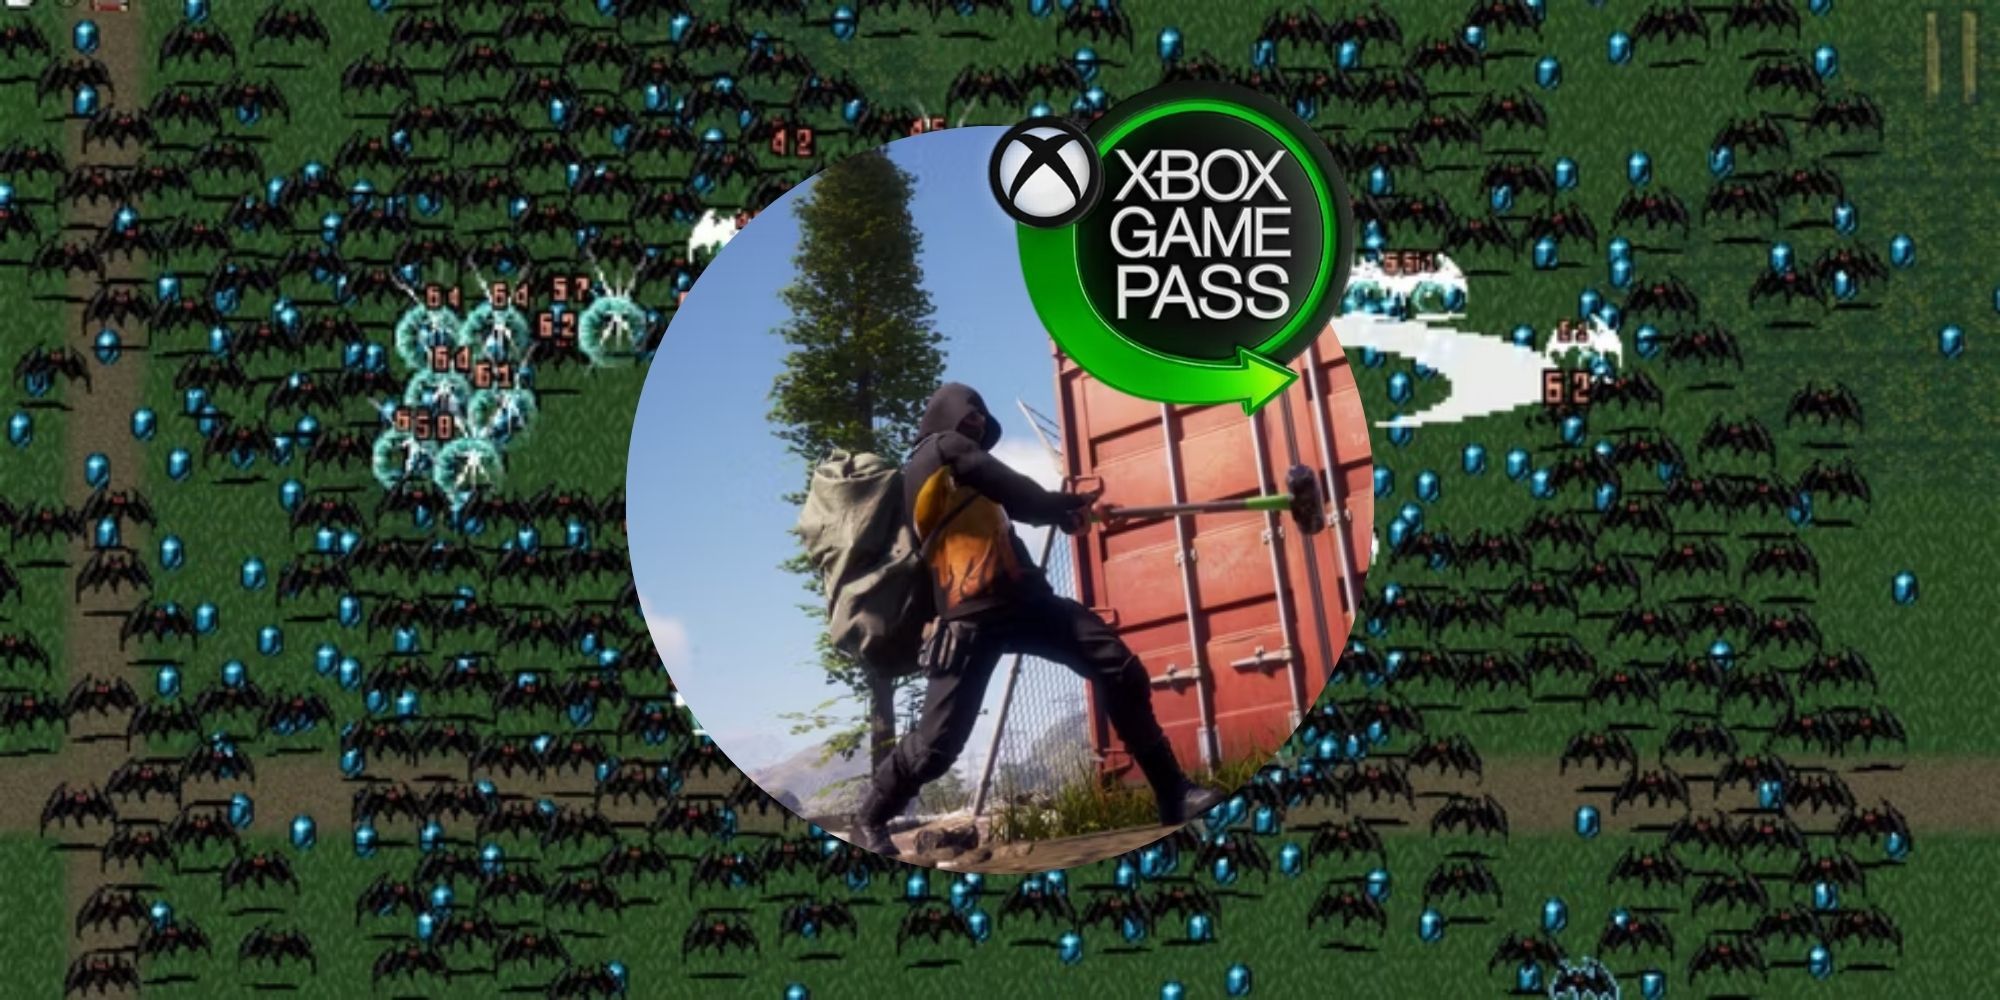 Survival Games On Xbox Game Pass Featured Image Vampire Survivors Background With State Of Decay 2 In The Foreground